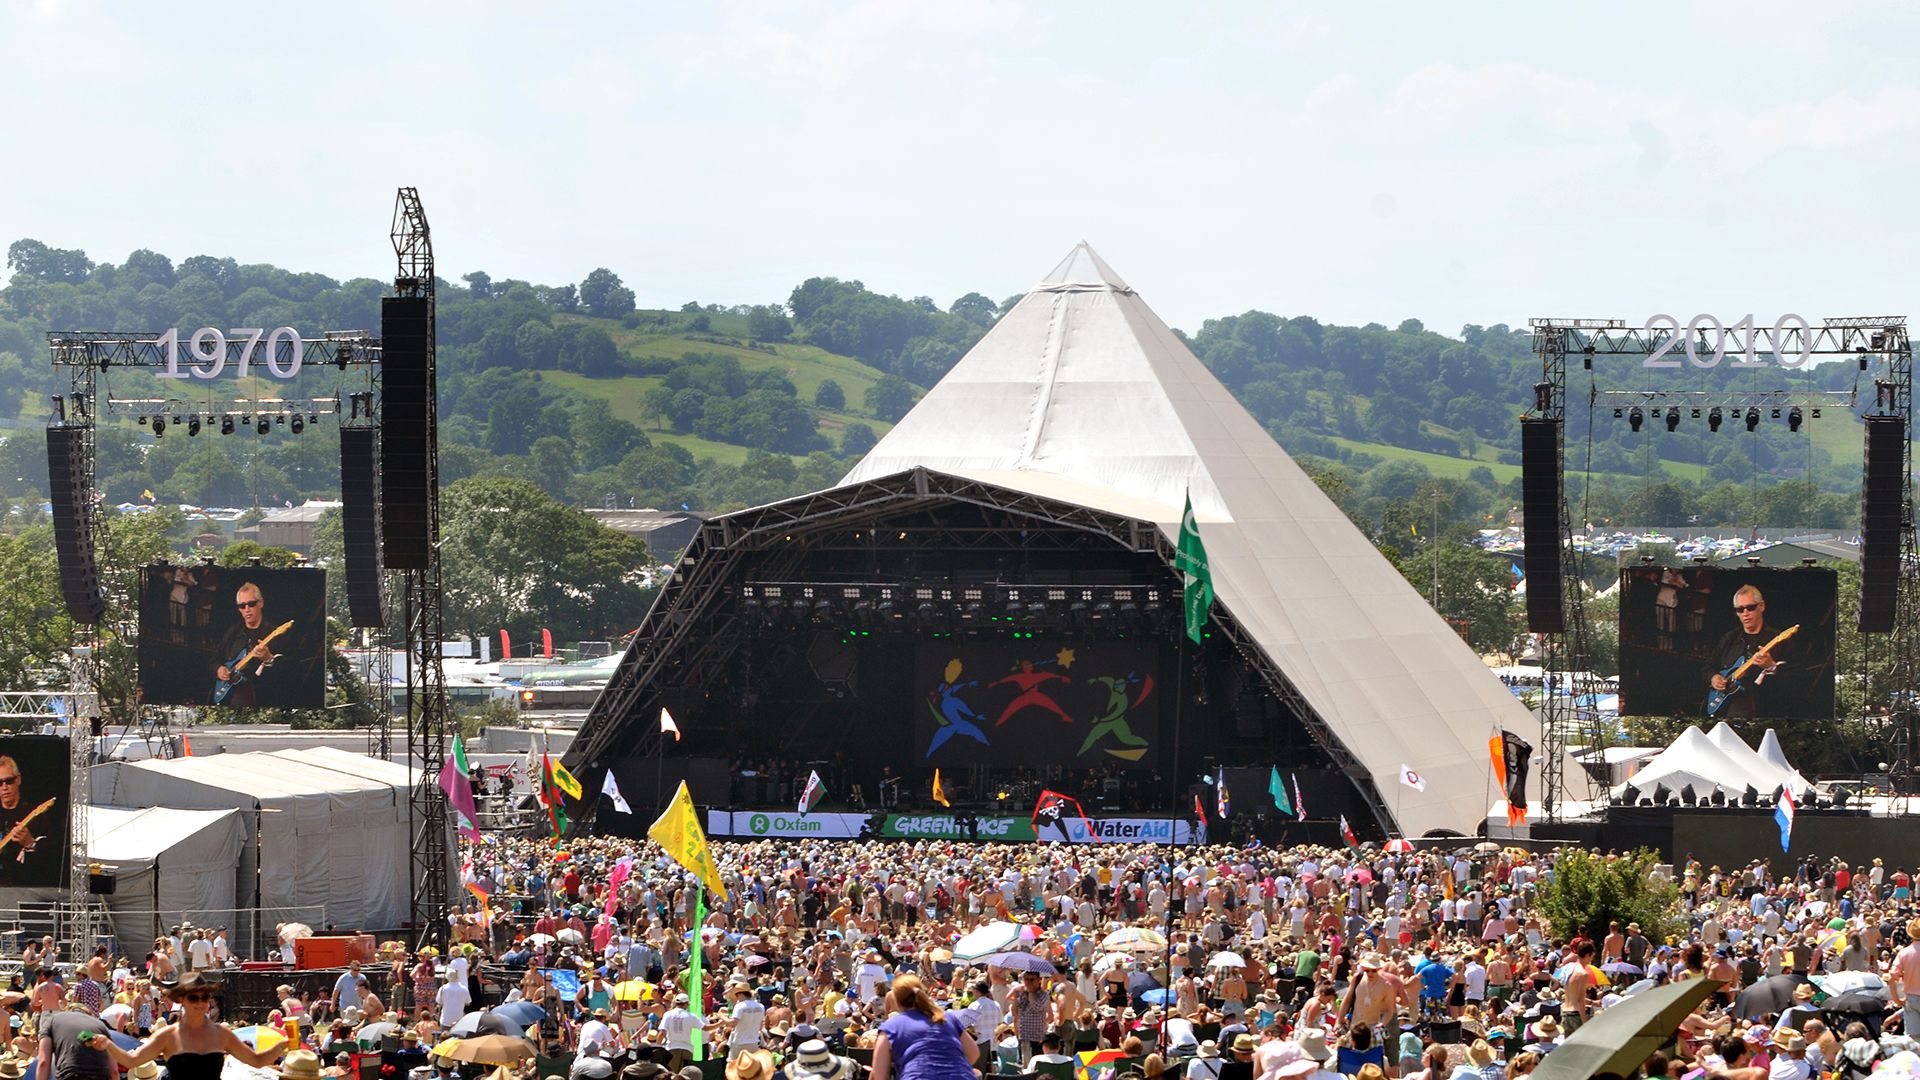 Pyramid Stage at Glastonbury Festival in 2010. 